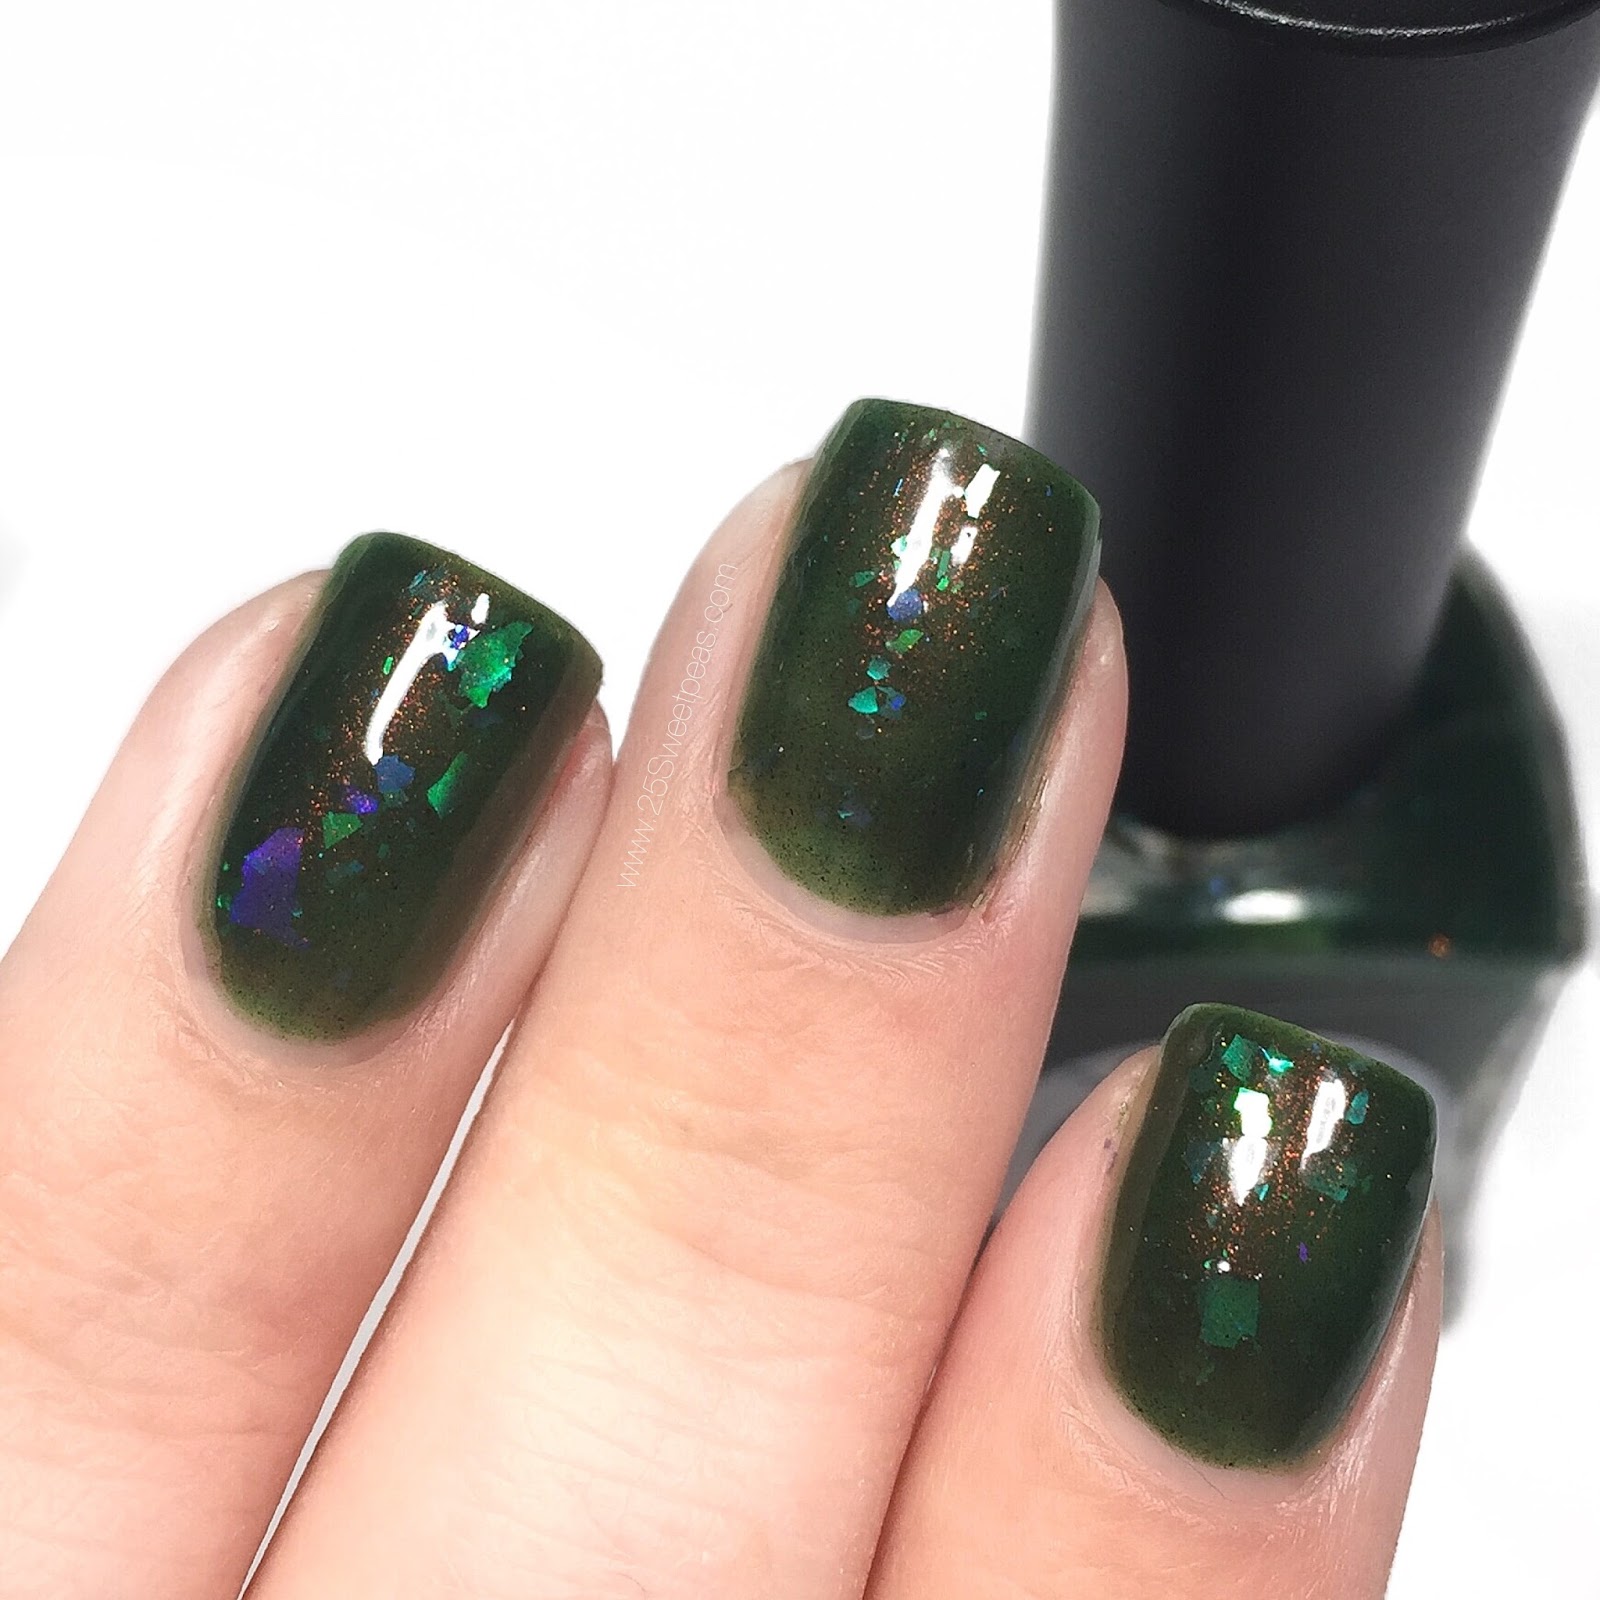 Lemming Lacquer Disjointed